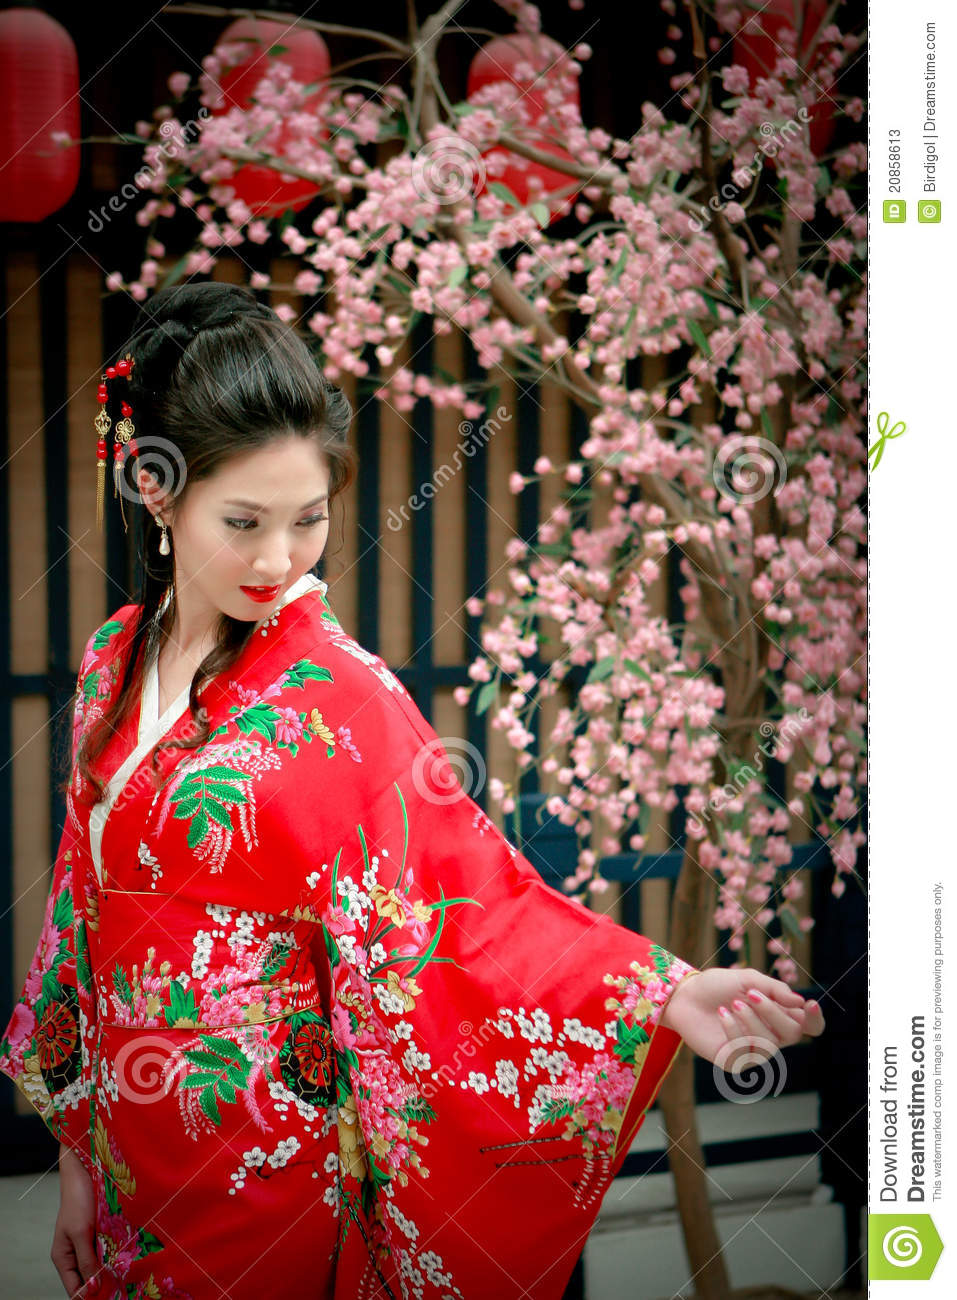 Of Young Beautiful Girl In Red Kimono Stock Photos   Image  20858613